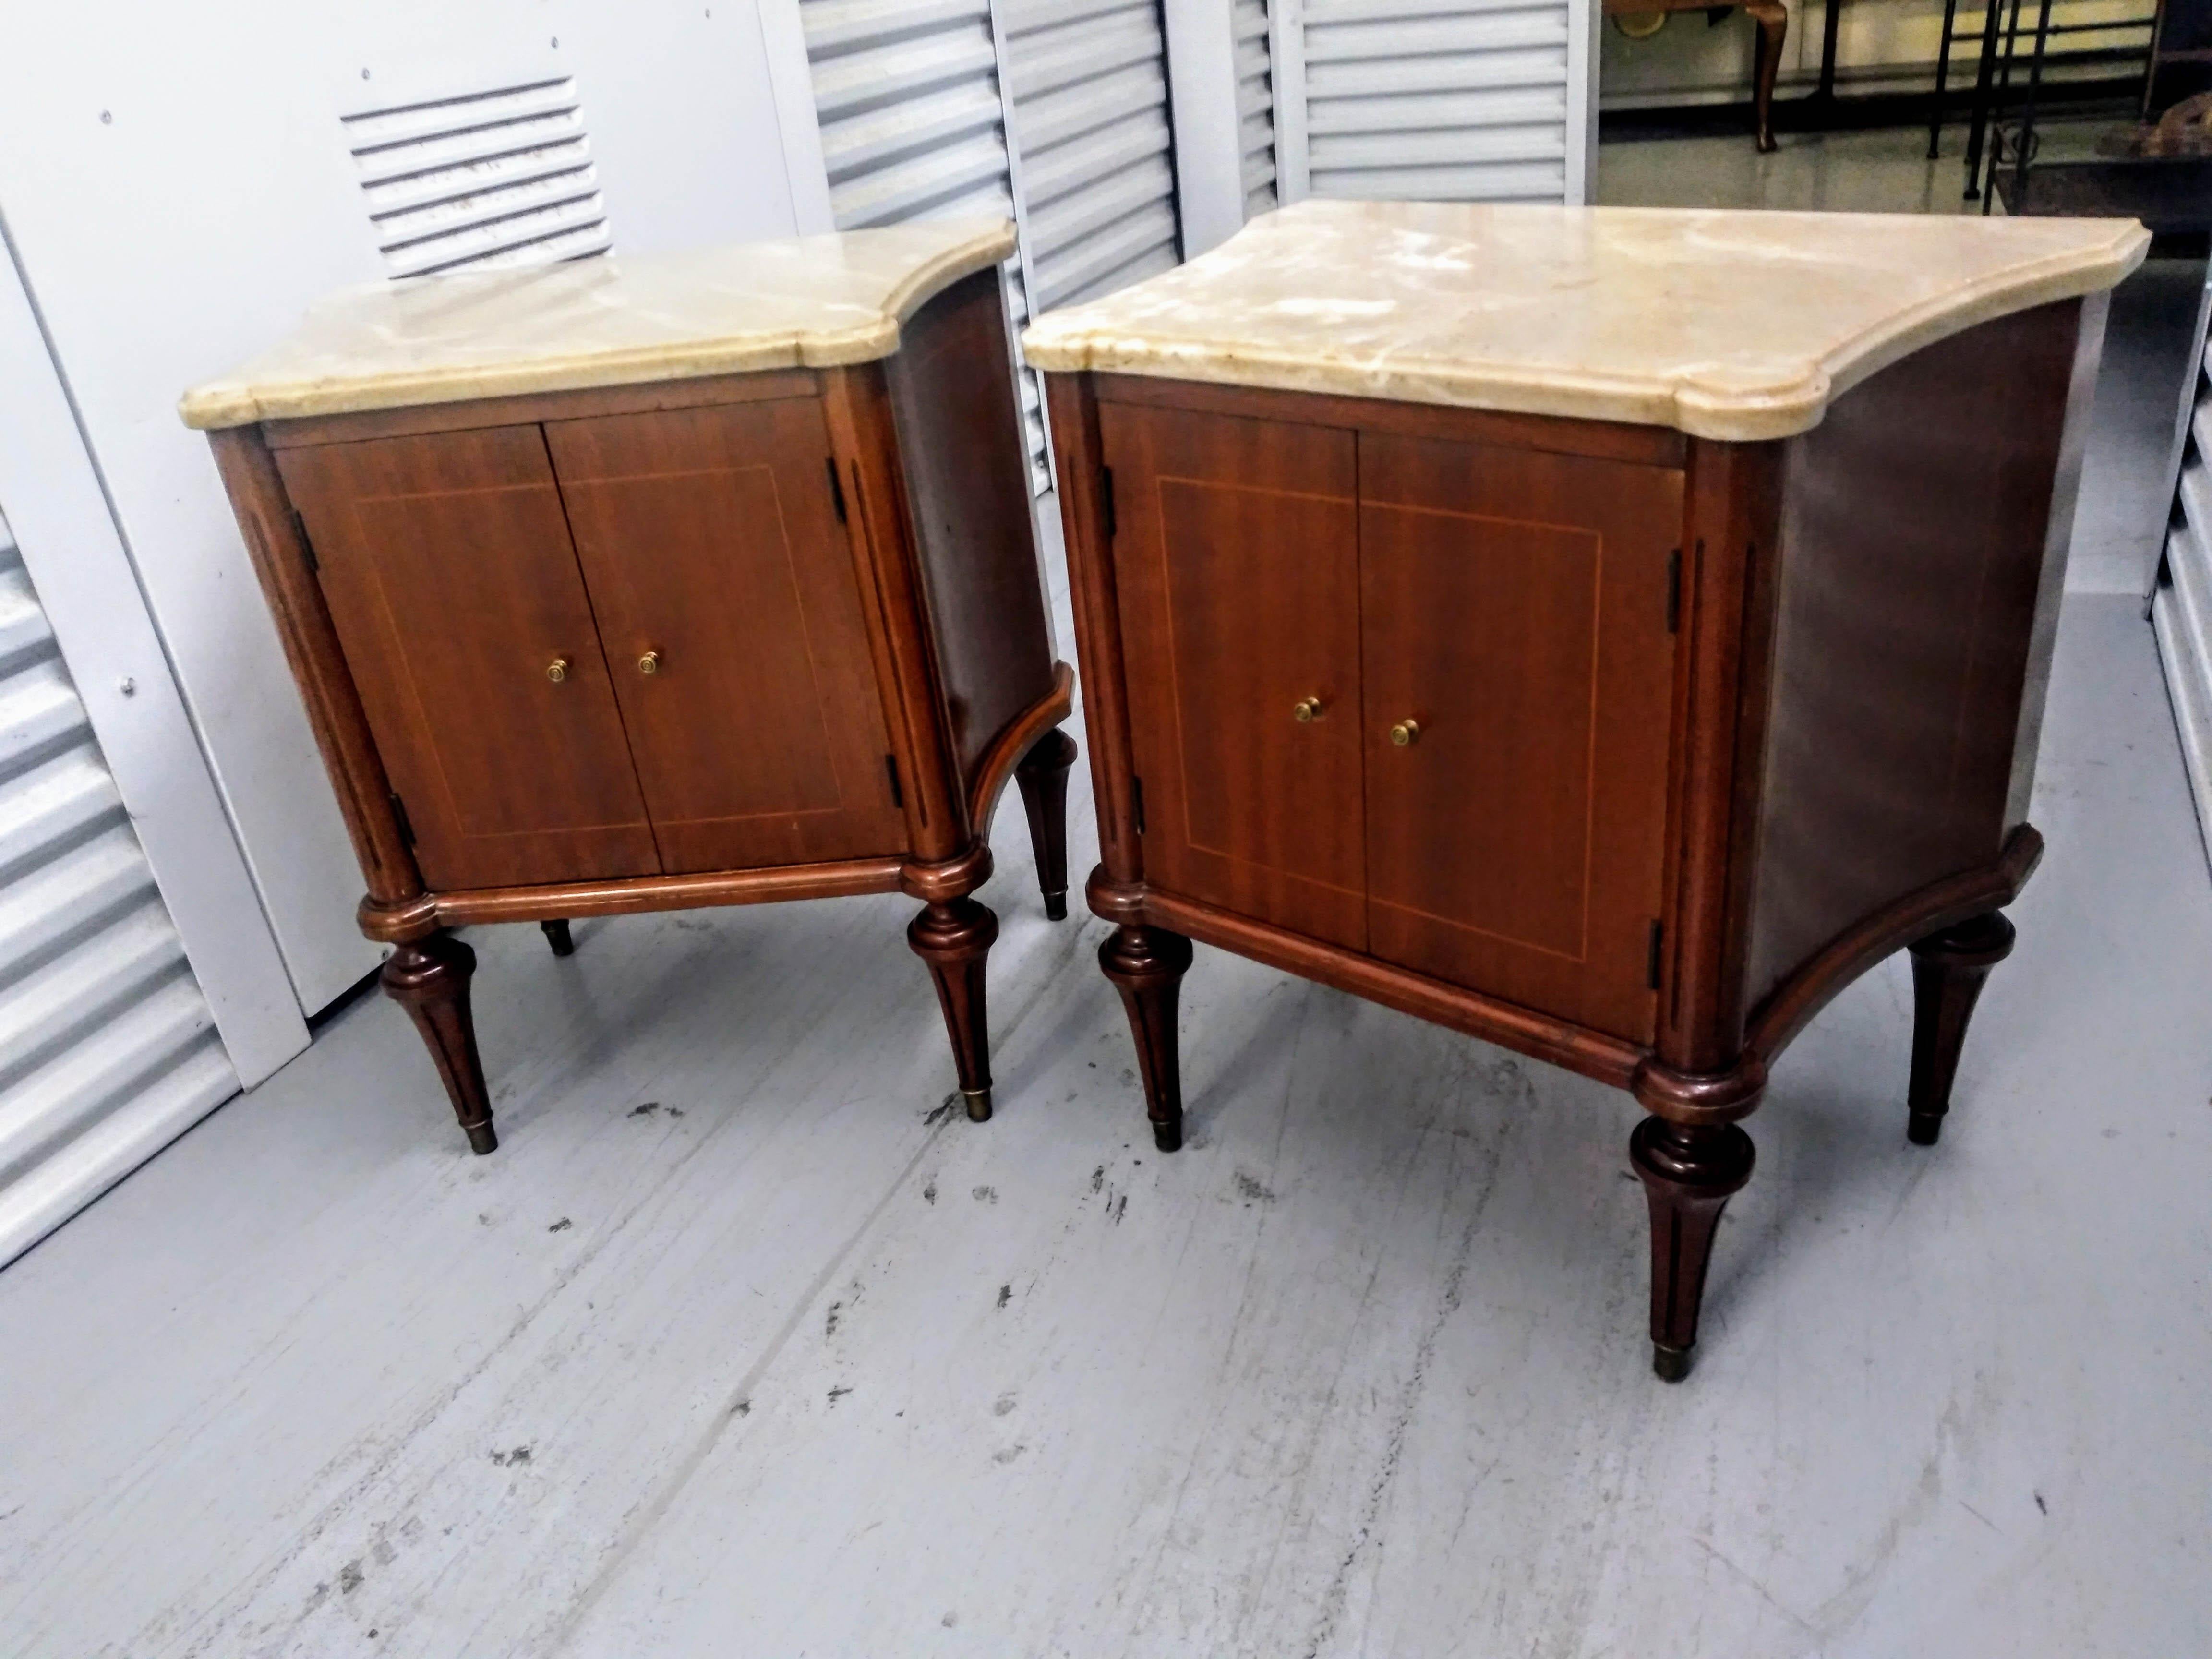 Pair Louis XVI Directoire style marble top commode nightstands

Elegant nightstands from Spain in ribbon mahogany on four tapered legs. Featuring double doors with a single drawer. The night stands have capped feet on all four legs and bronze pulls.